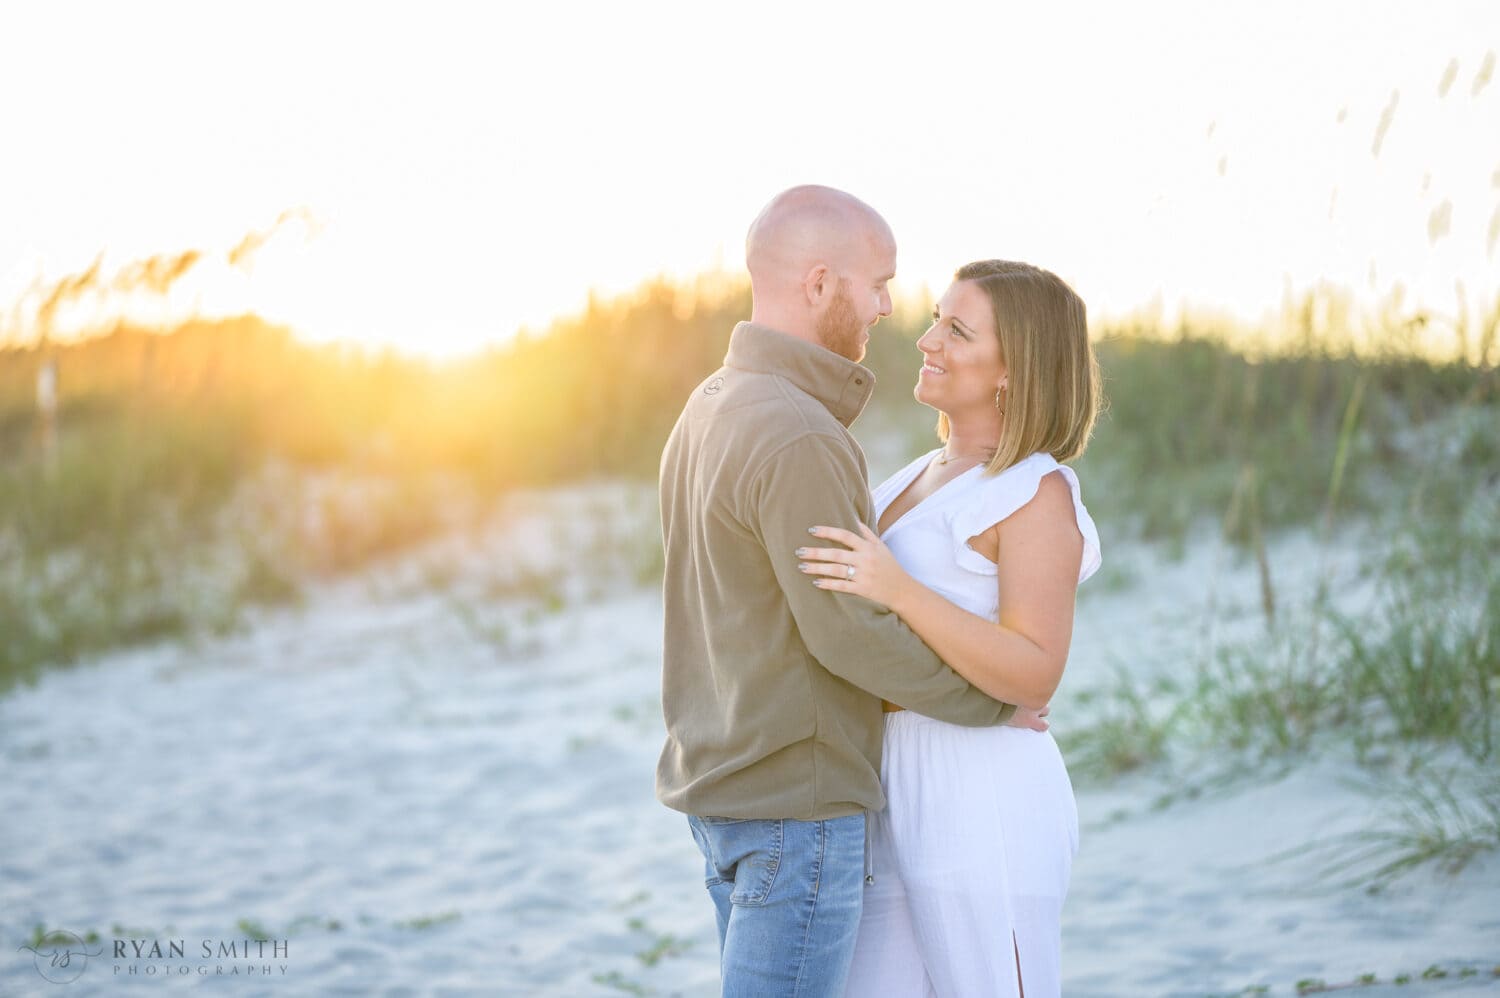 Looking into each other's eyes with sunset over the dunes - Huntington Beach State Park